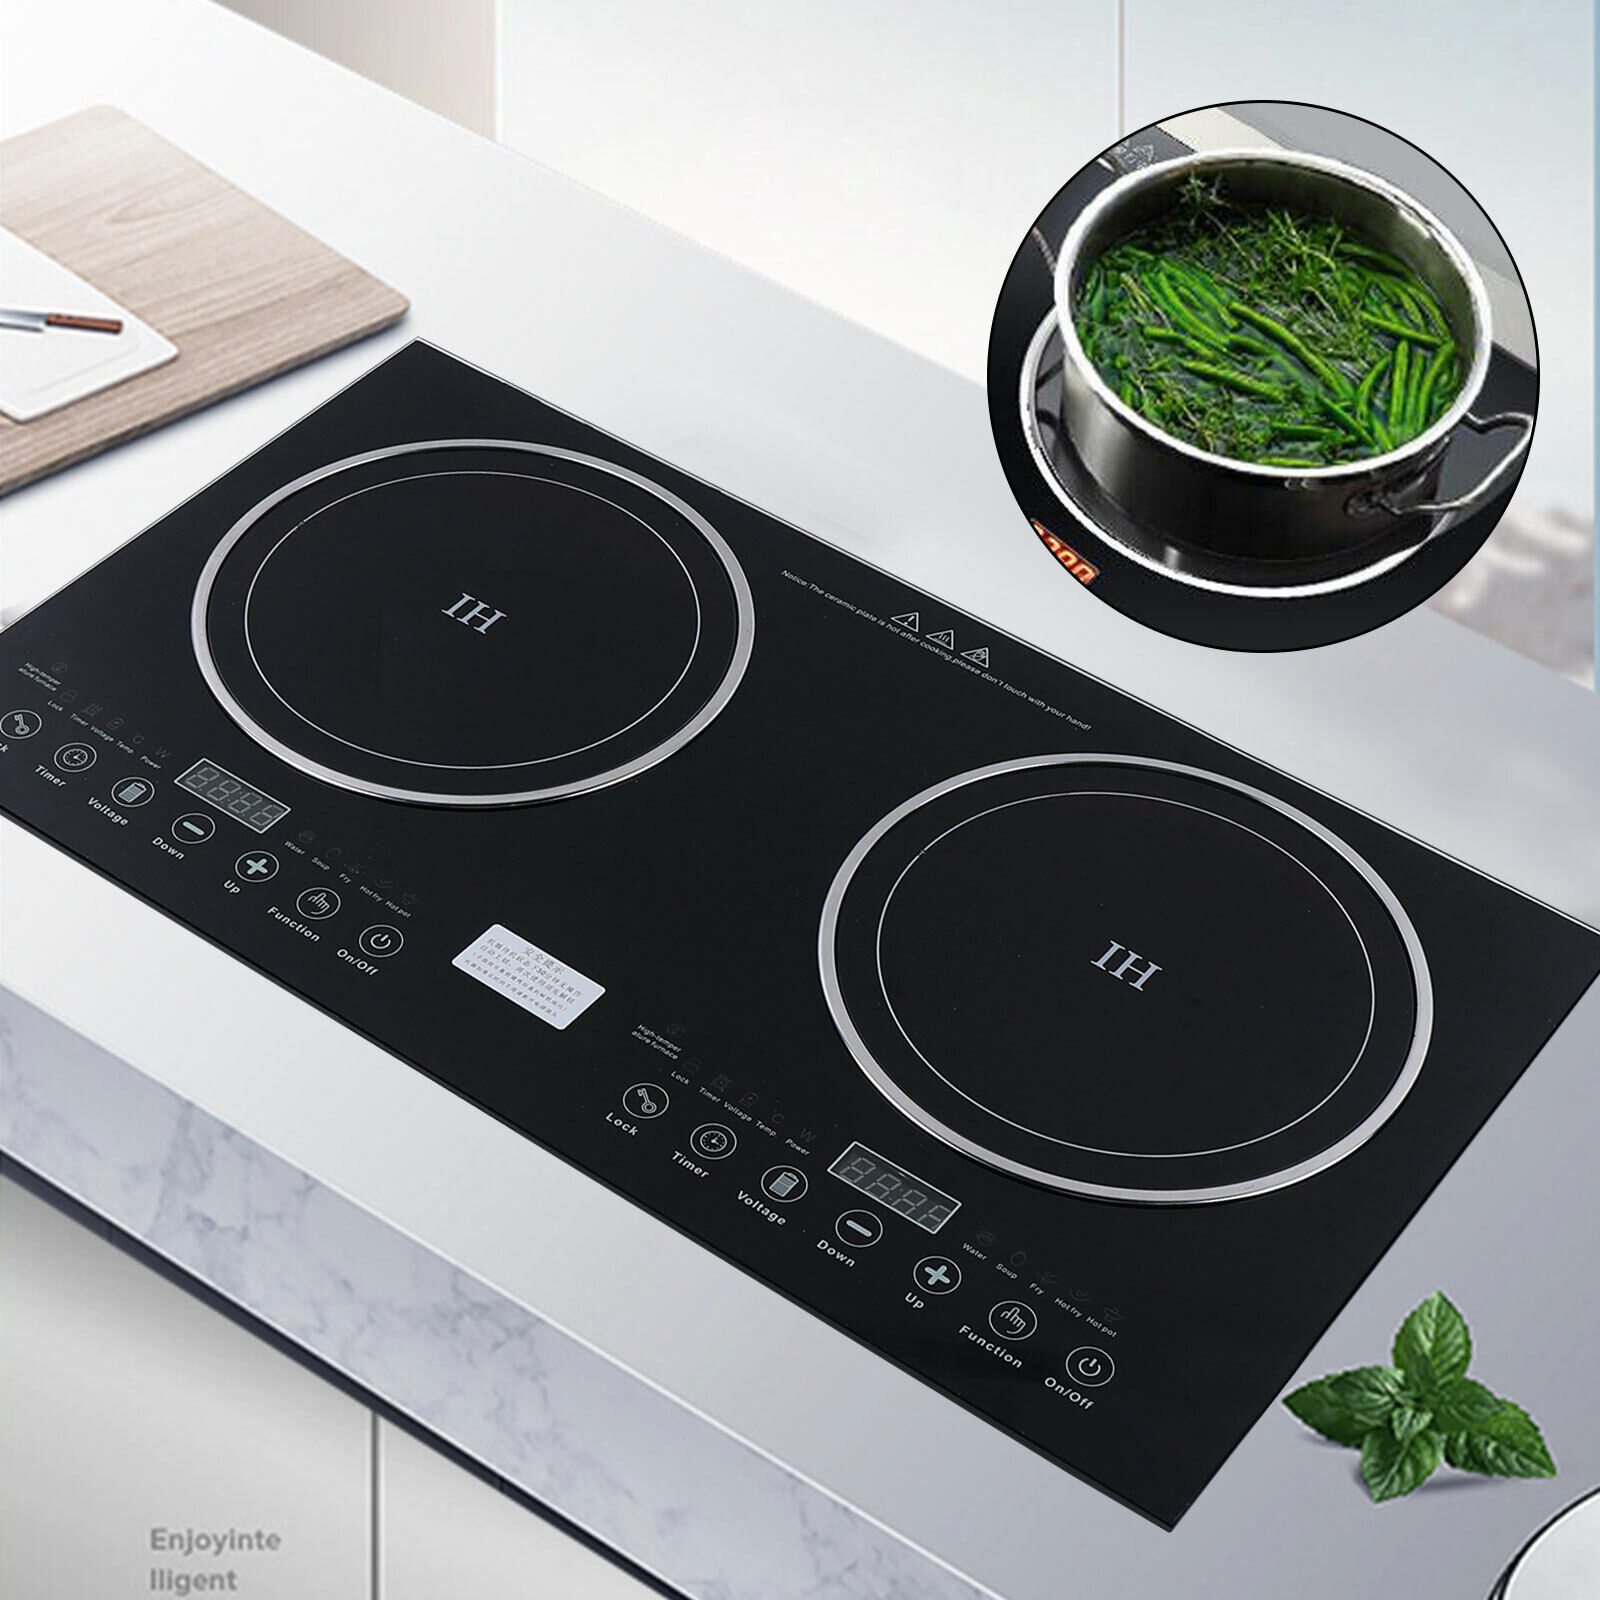 as a result Leninism hatred Electric Induction/Ceramic Cooker Countertop 2/Dual Burner Cooktop  2400W/2600W | eBay